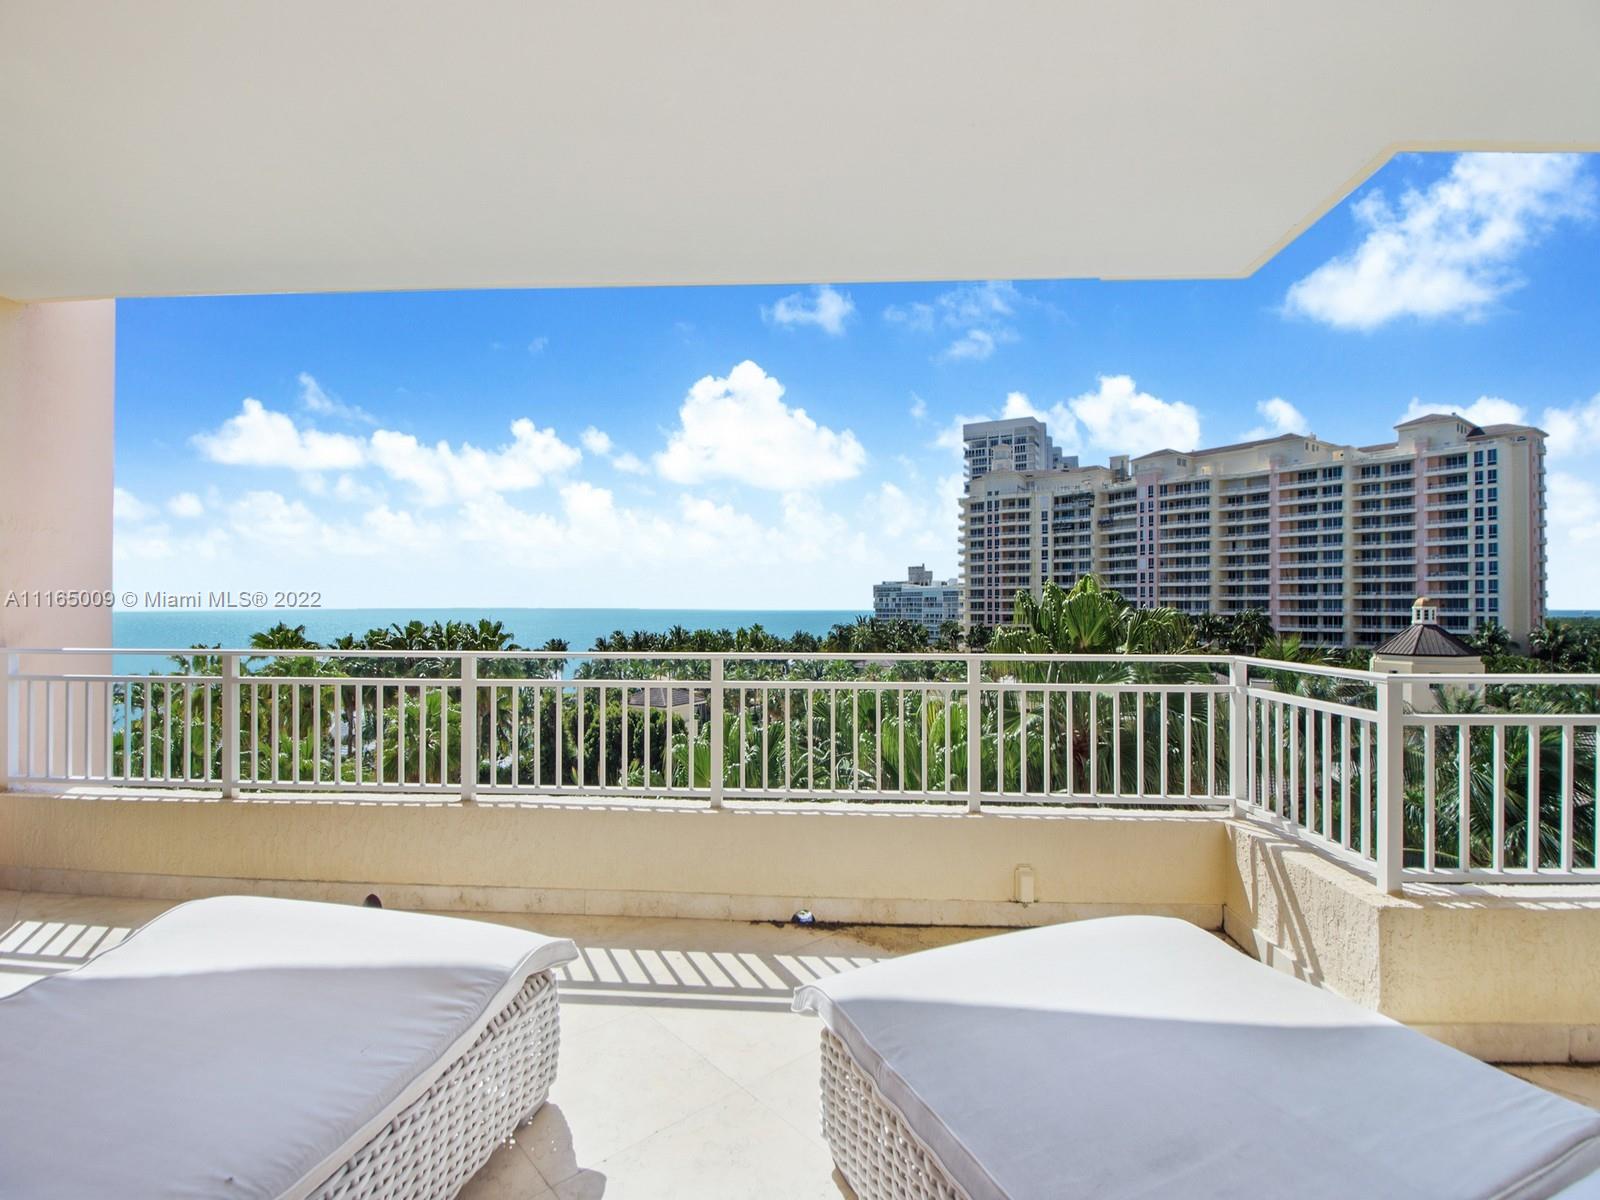 Desirable large 3 bed 4.5 bath unit + staff quarters. In highly sought after Ocean Tower 2 building. Has beautiful tropical views of the ocean from all balconies. Enjoy the lifestyle that Ocean Club Condominium has to offer: private club with tennis courts, restaurant, gym, spa, kids club, beach access, pools and more. Ocean Club Condominium is located on the beautiful Key Biscayne Island,15 minutes from Brickell area, Coral Gables, and Coconut Grove, 25 minutes from Miami International Airport and Miami Beach. Tenant Occupied til June.